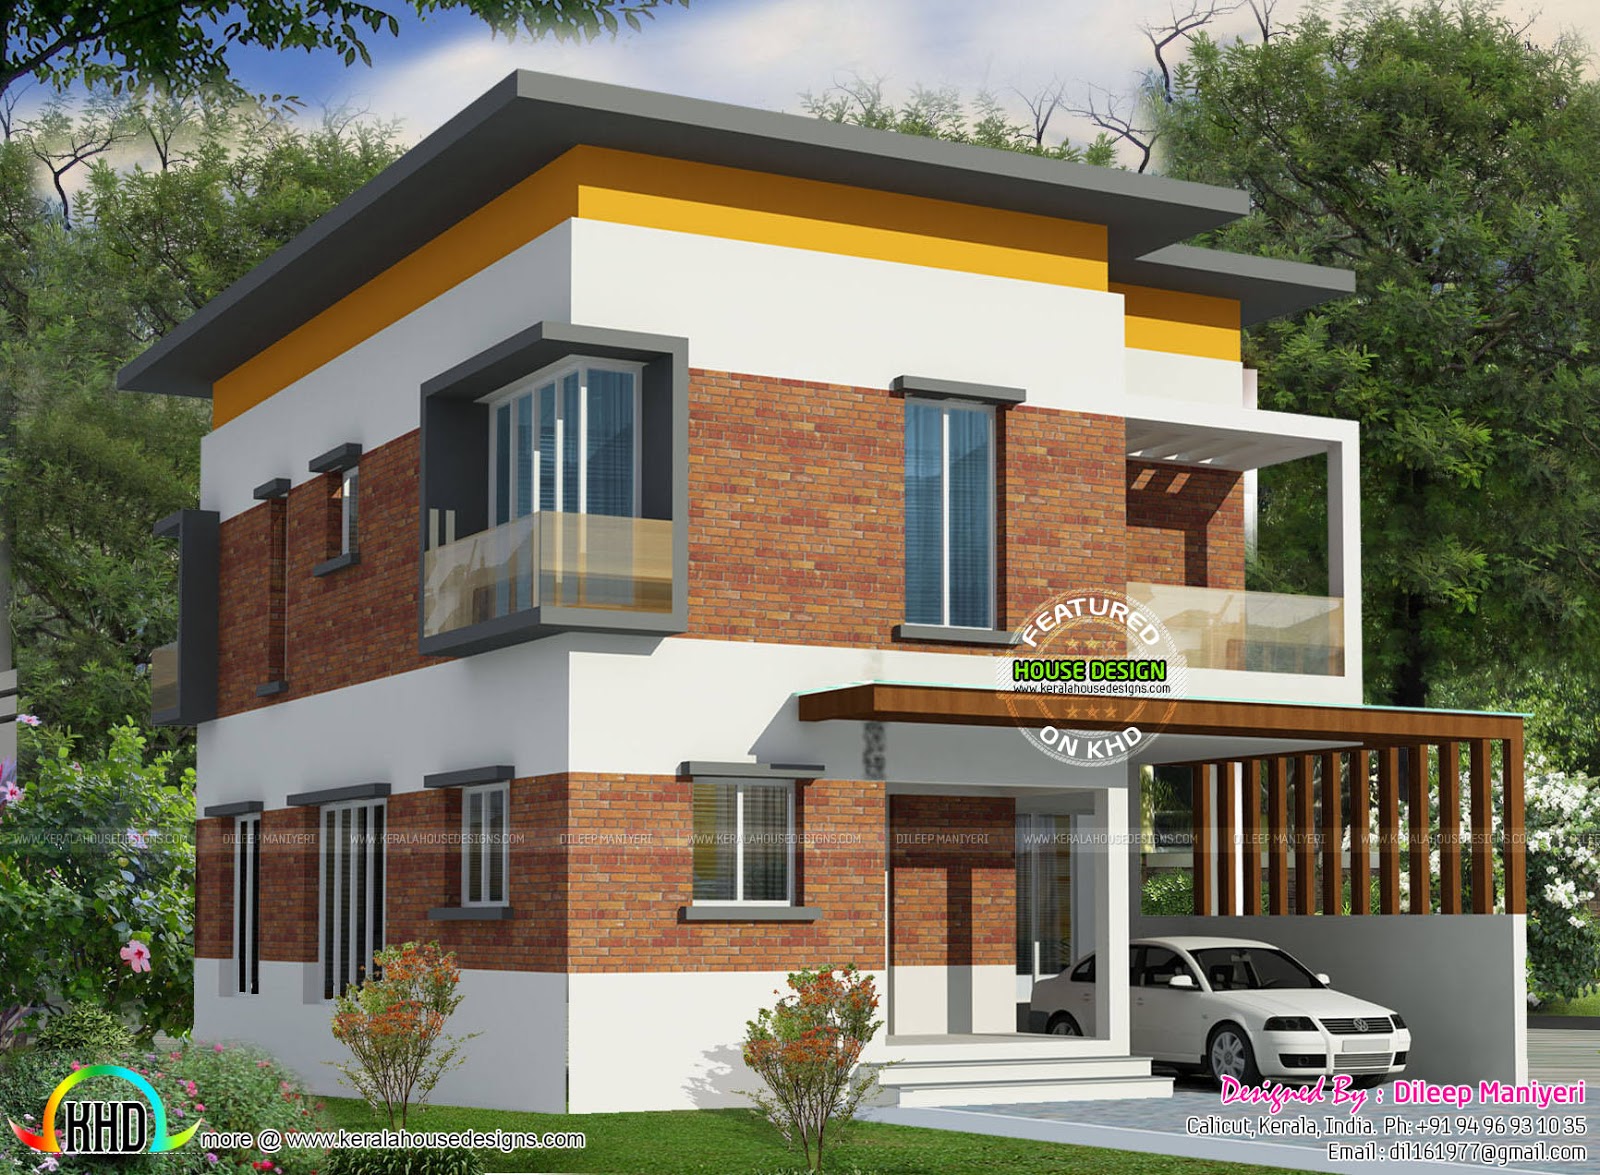 3 bedroom flat  roof  small  home  Kerala home  design and 